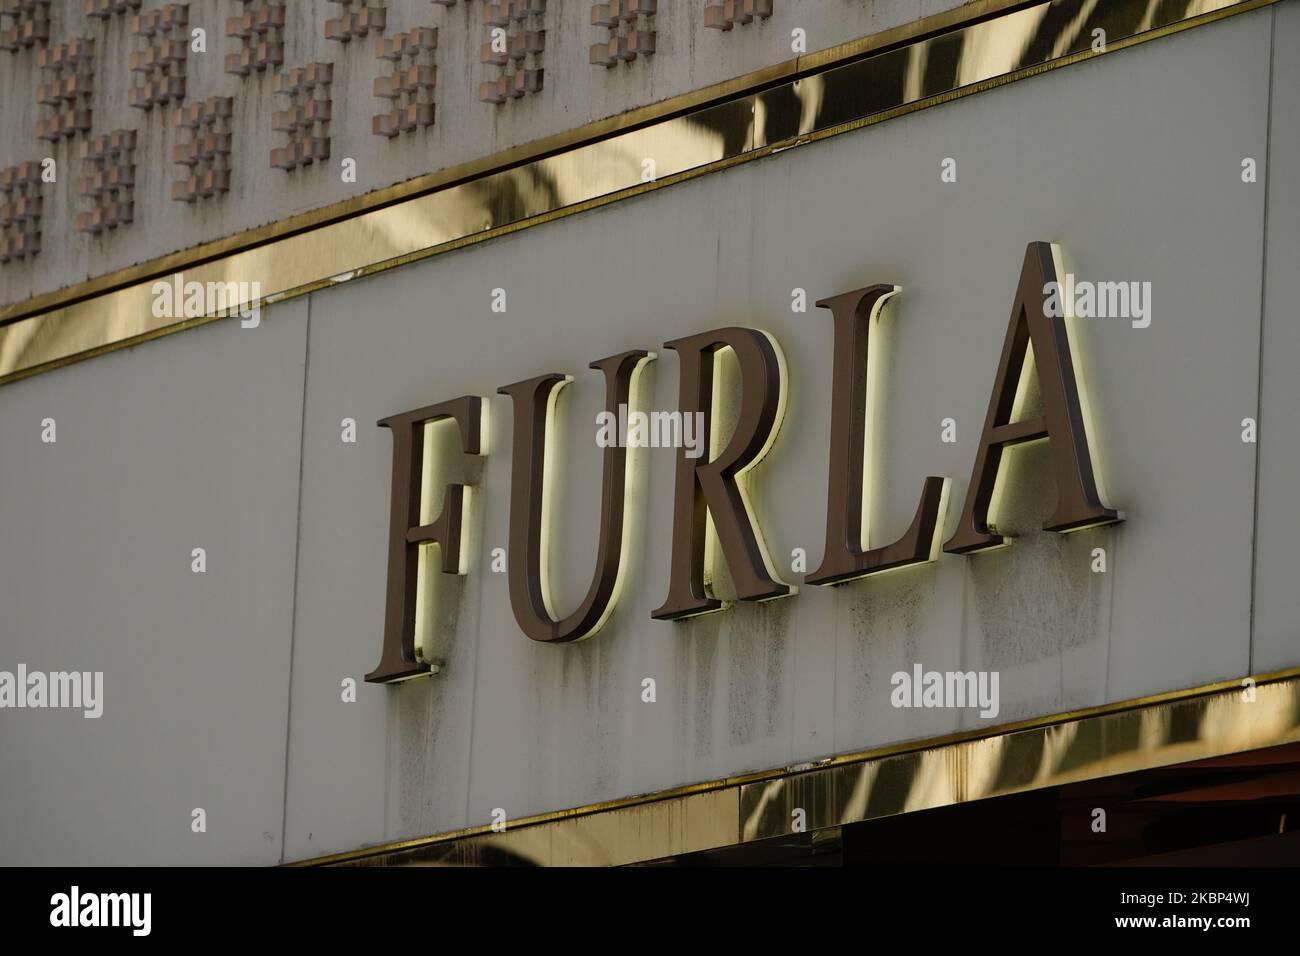 A view of Furla during the coronavirus pandemic on May 20, 2020 in 5th Ave., New York City. COVID-19 has spread to most countries around the world, claiming over 316,000 lives with over 4.8 million infections reported. (Photo by John Nacion/NurPhoto) Stock Photo